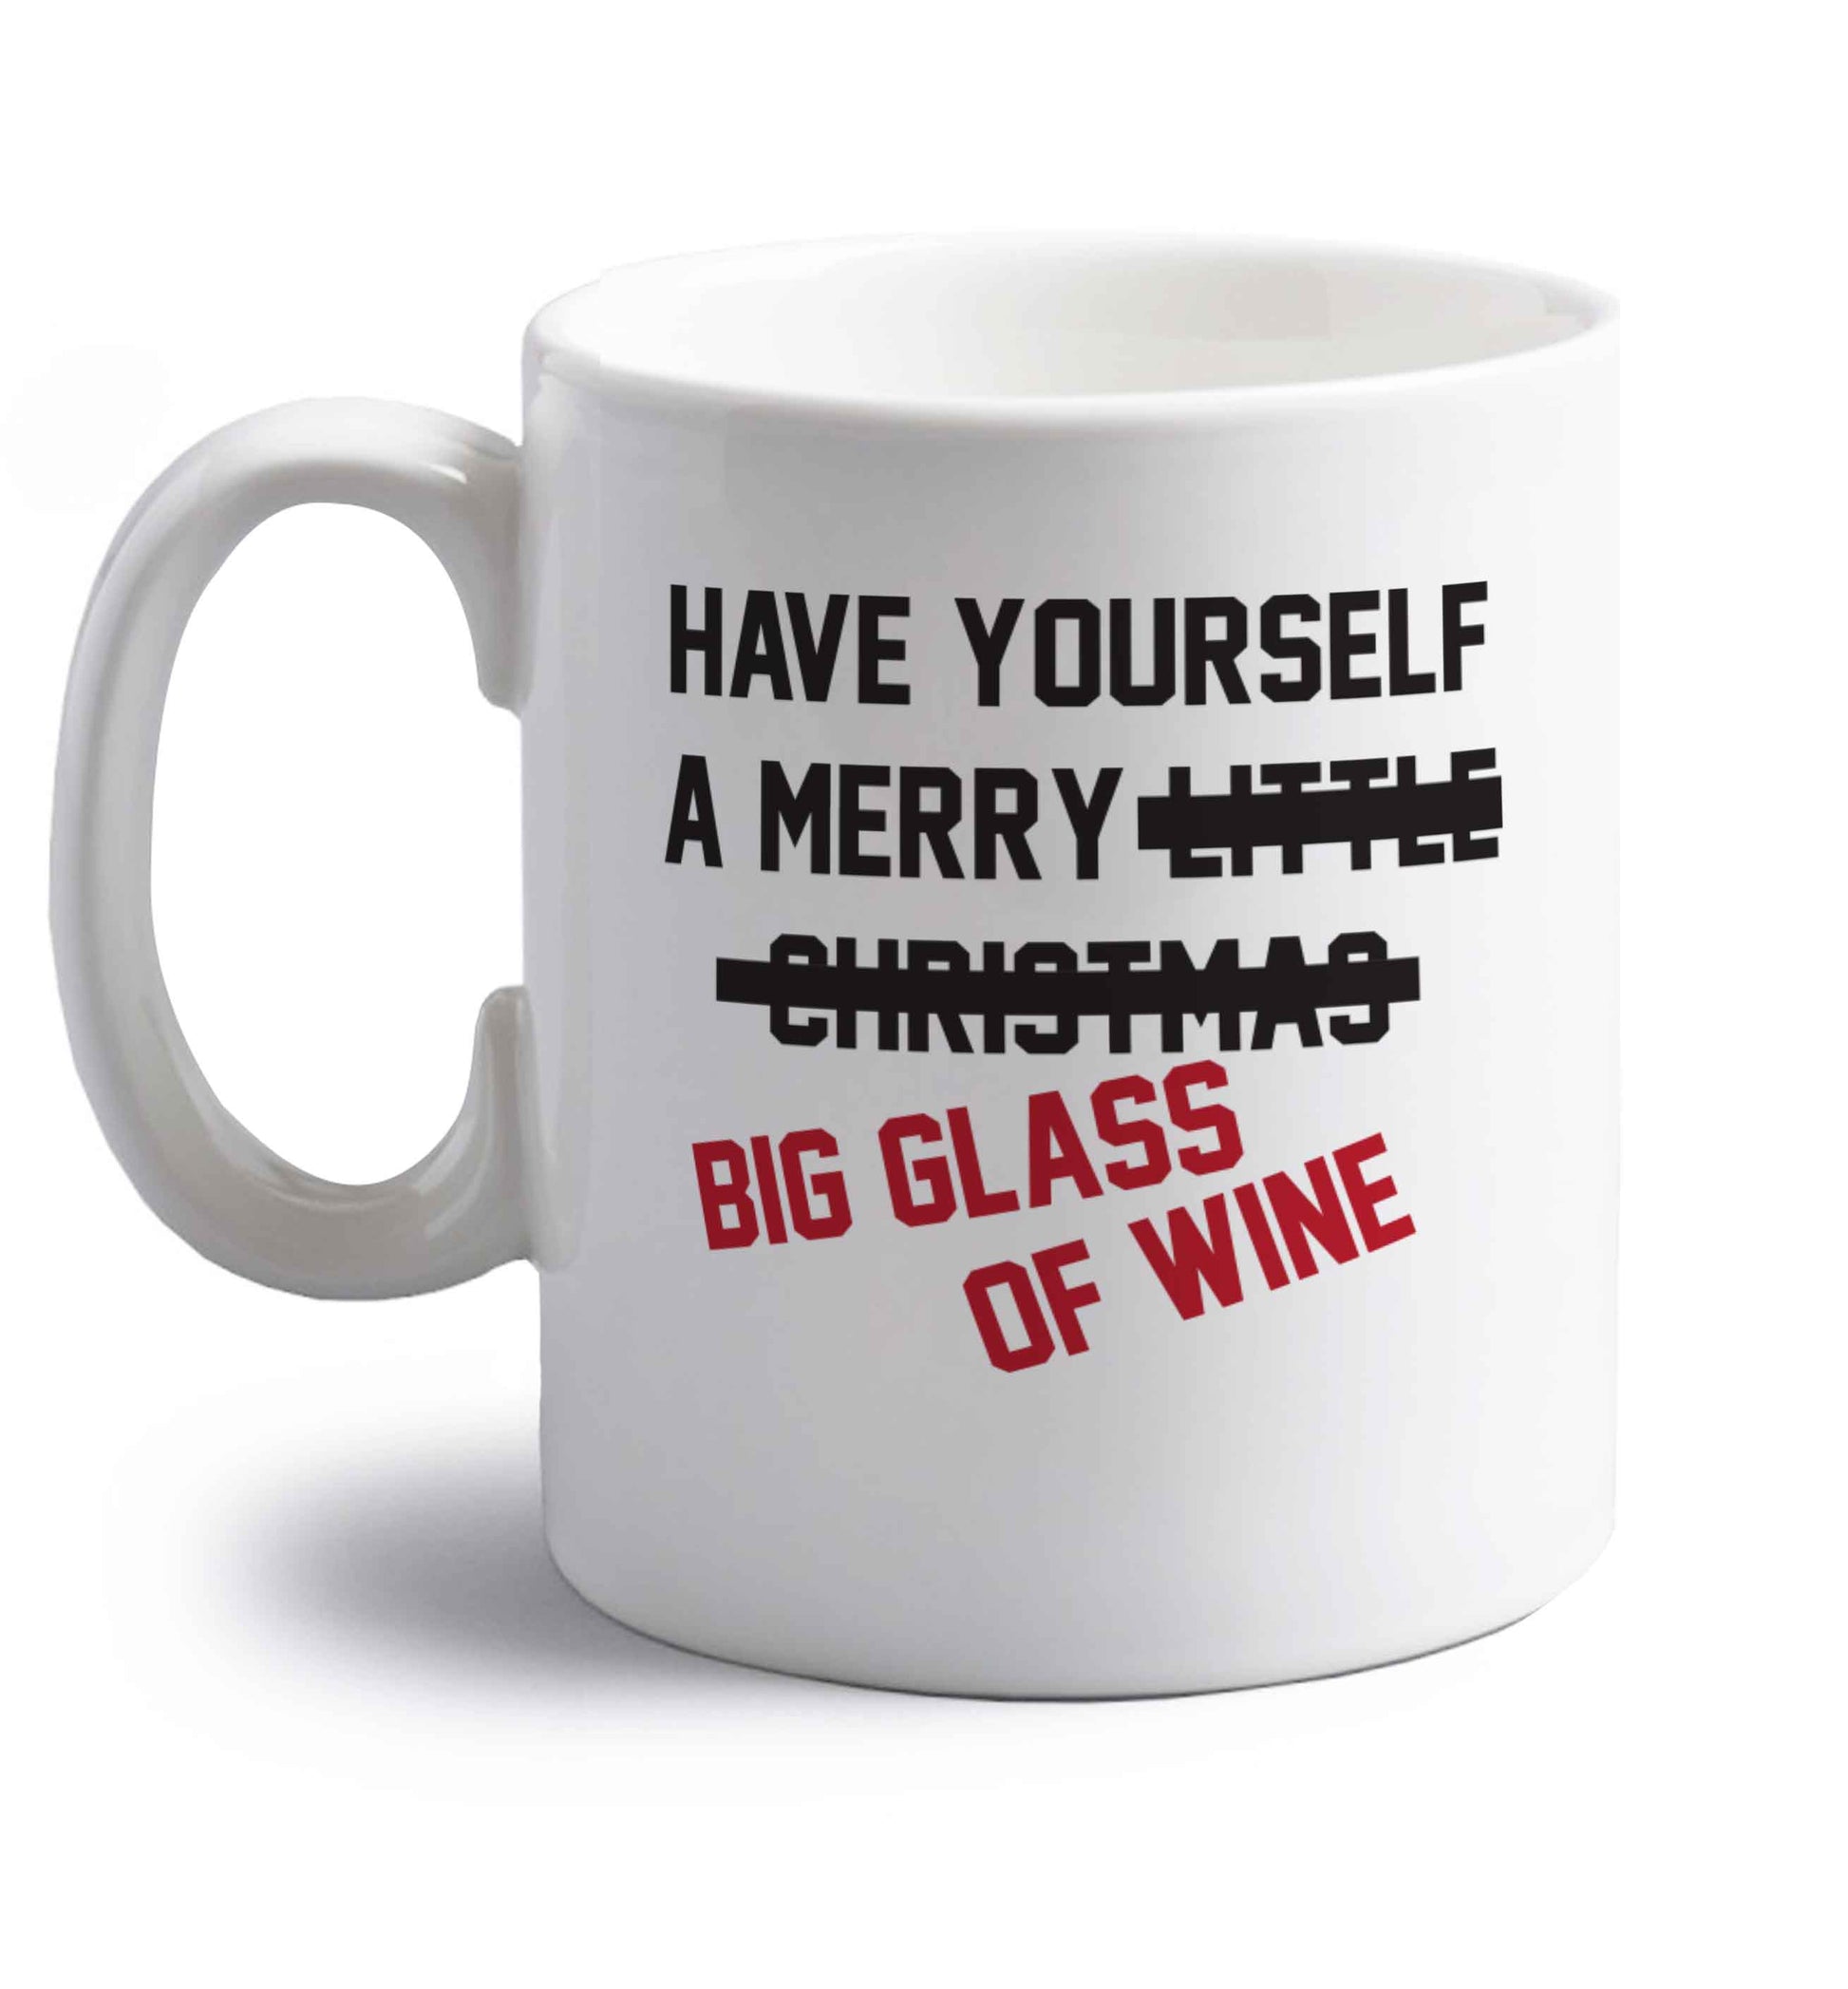 Have yourself a merry big glass of wine right handed white ceramic mug 